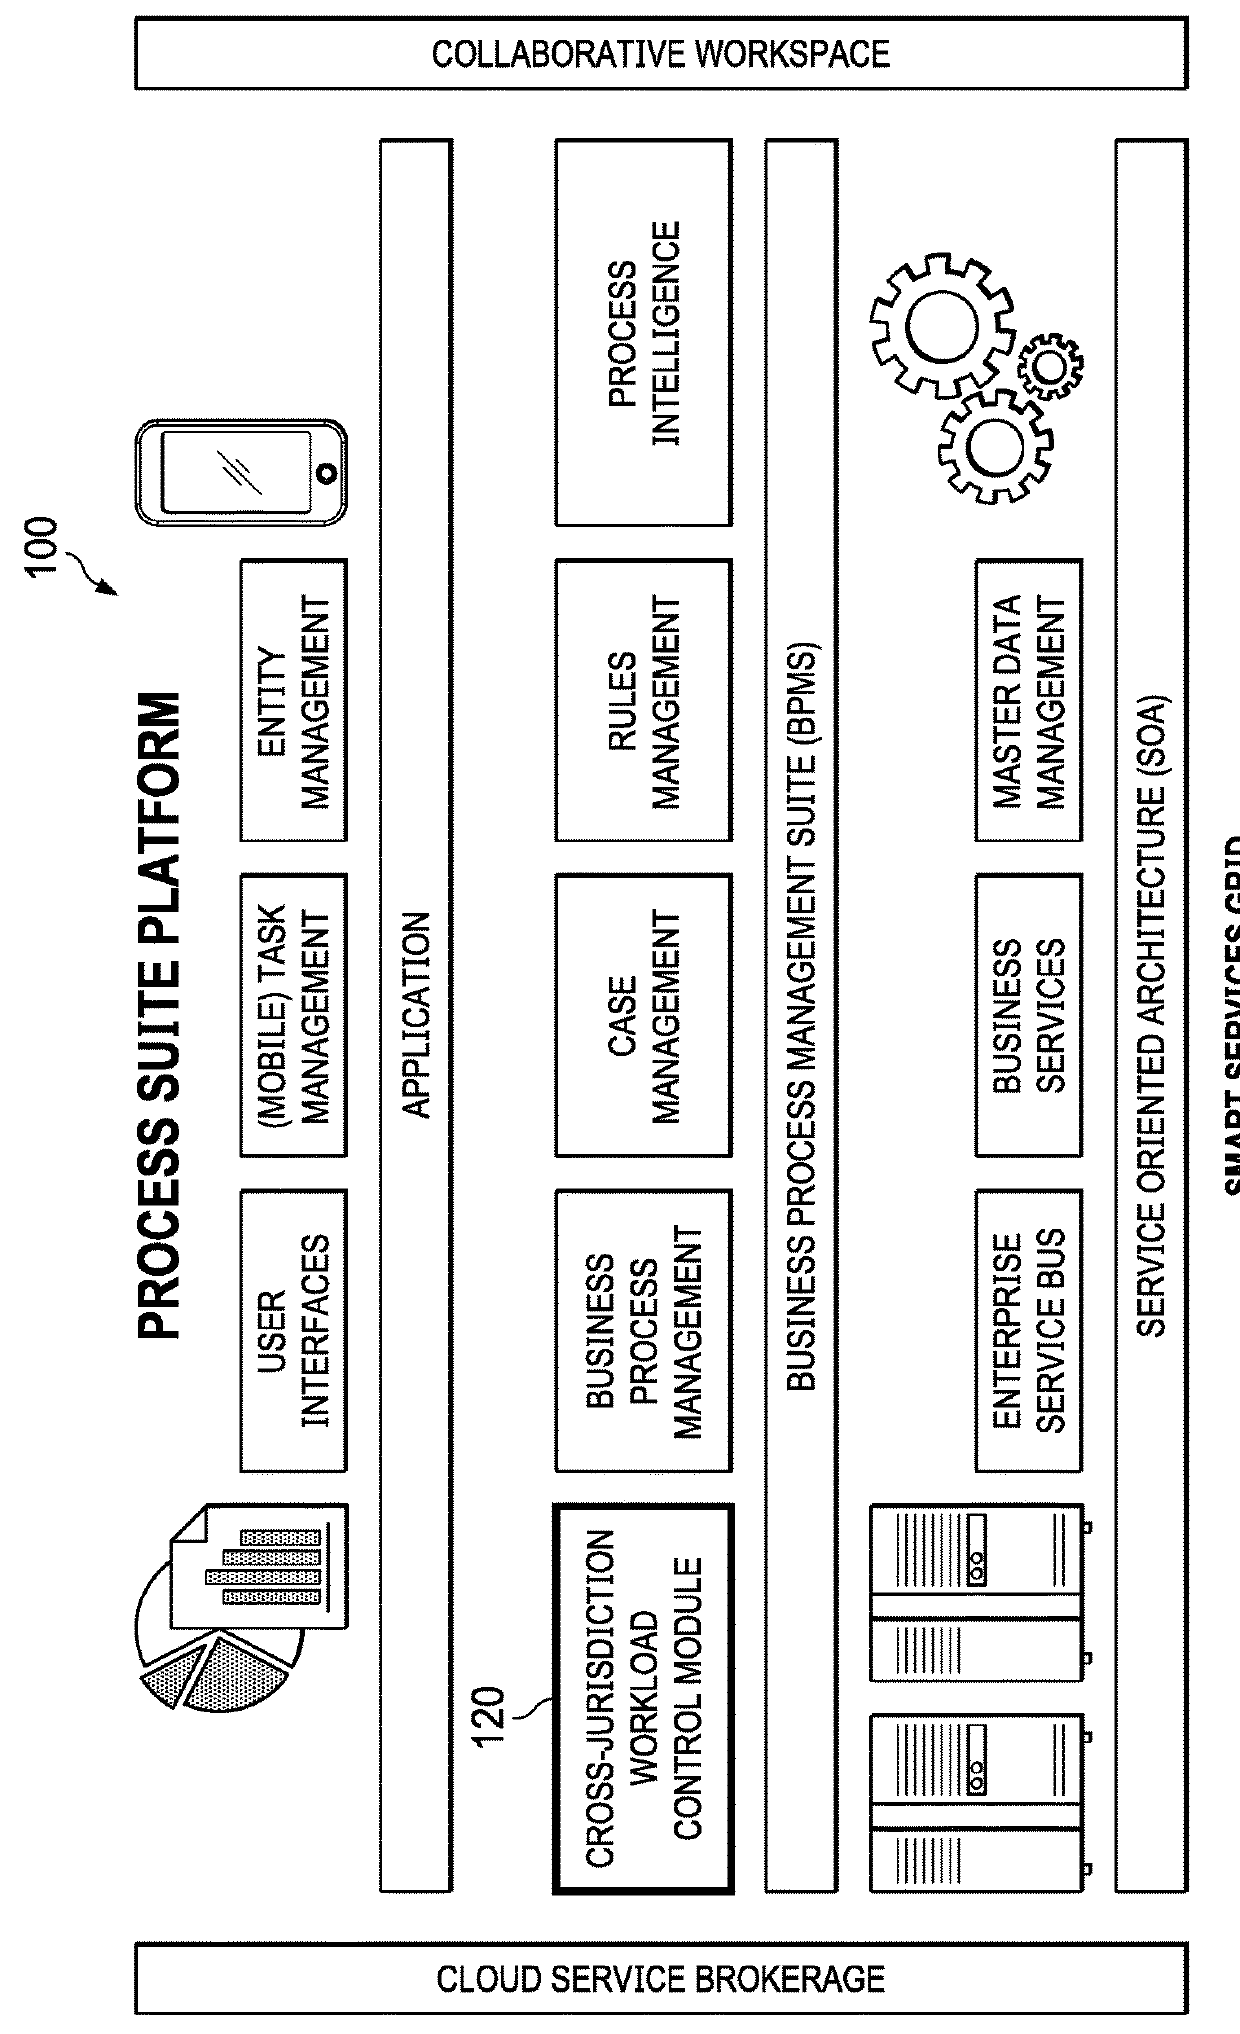 Cross-jurisdiction workload control systems and methods